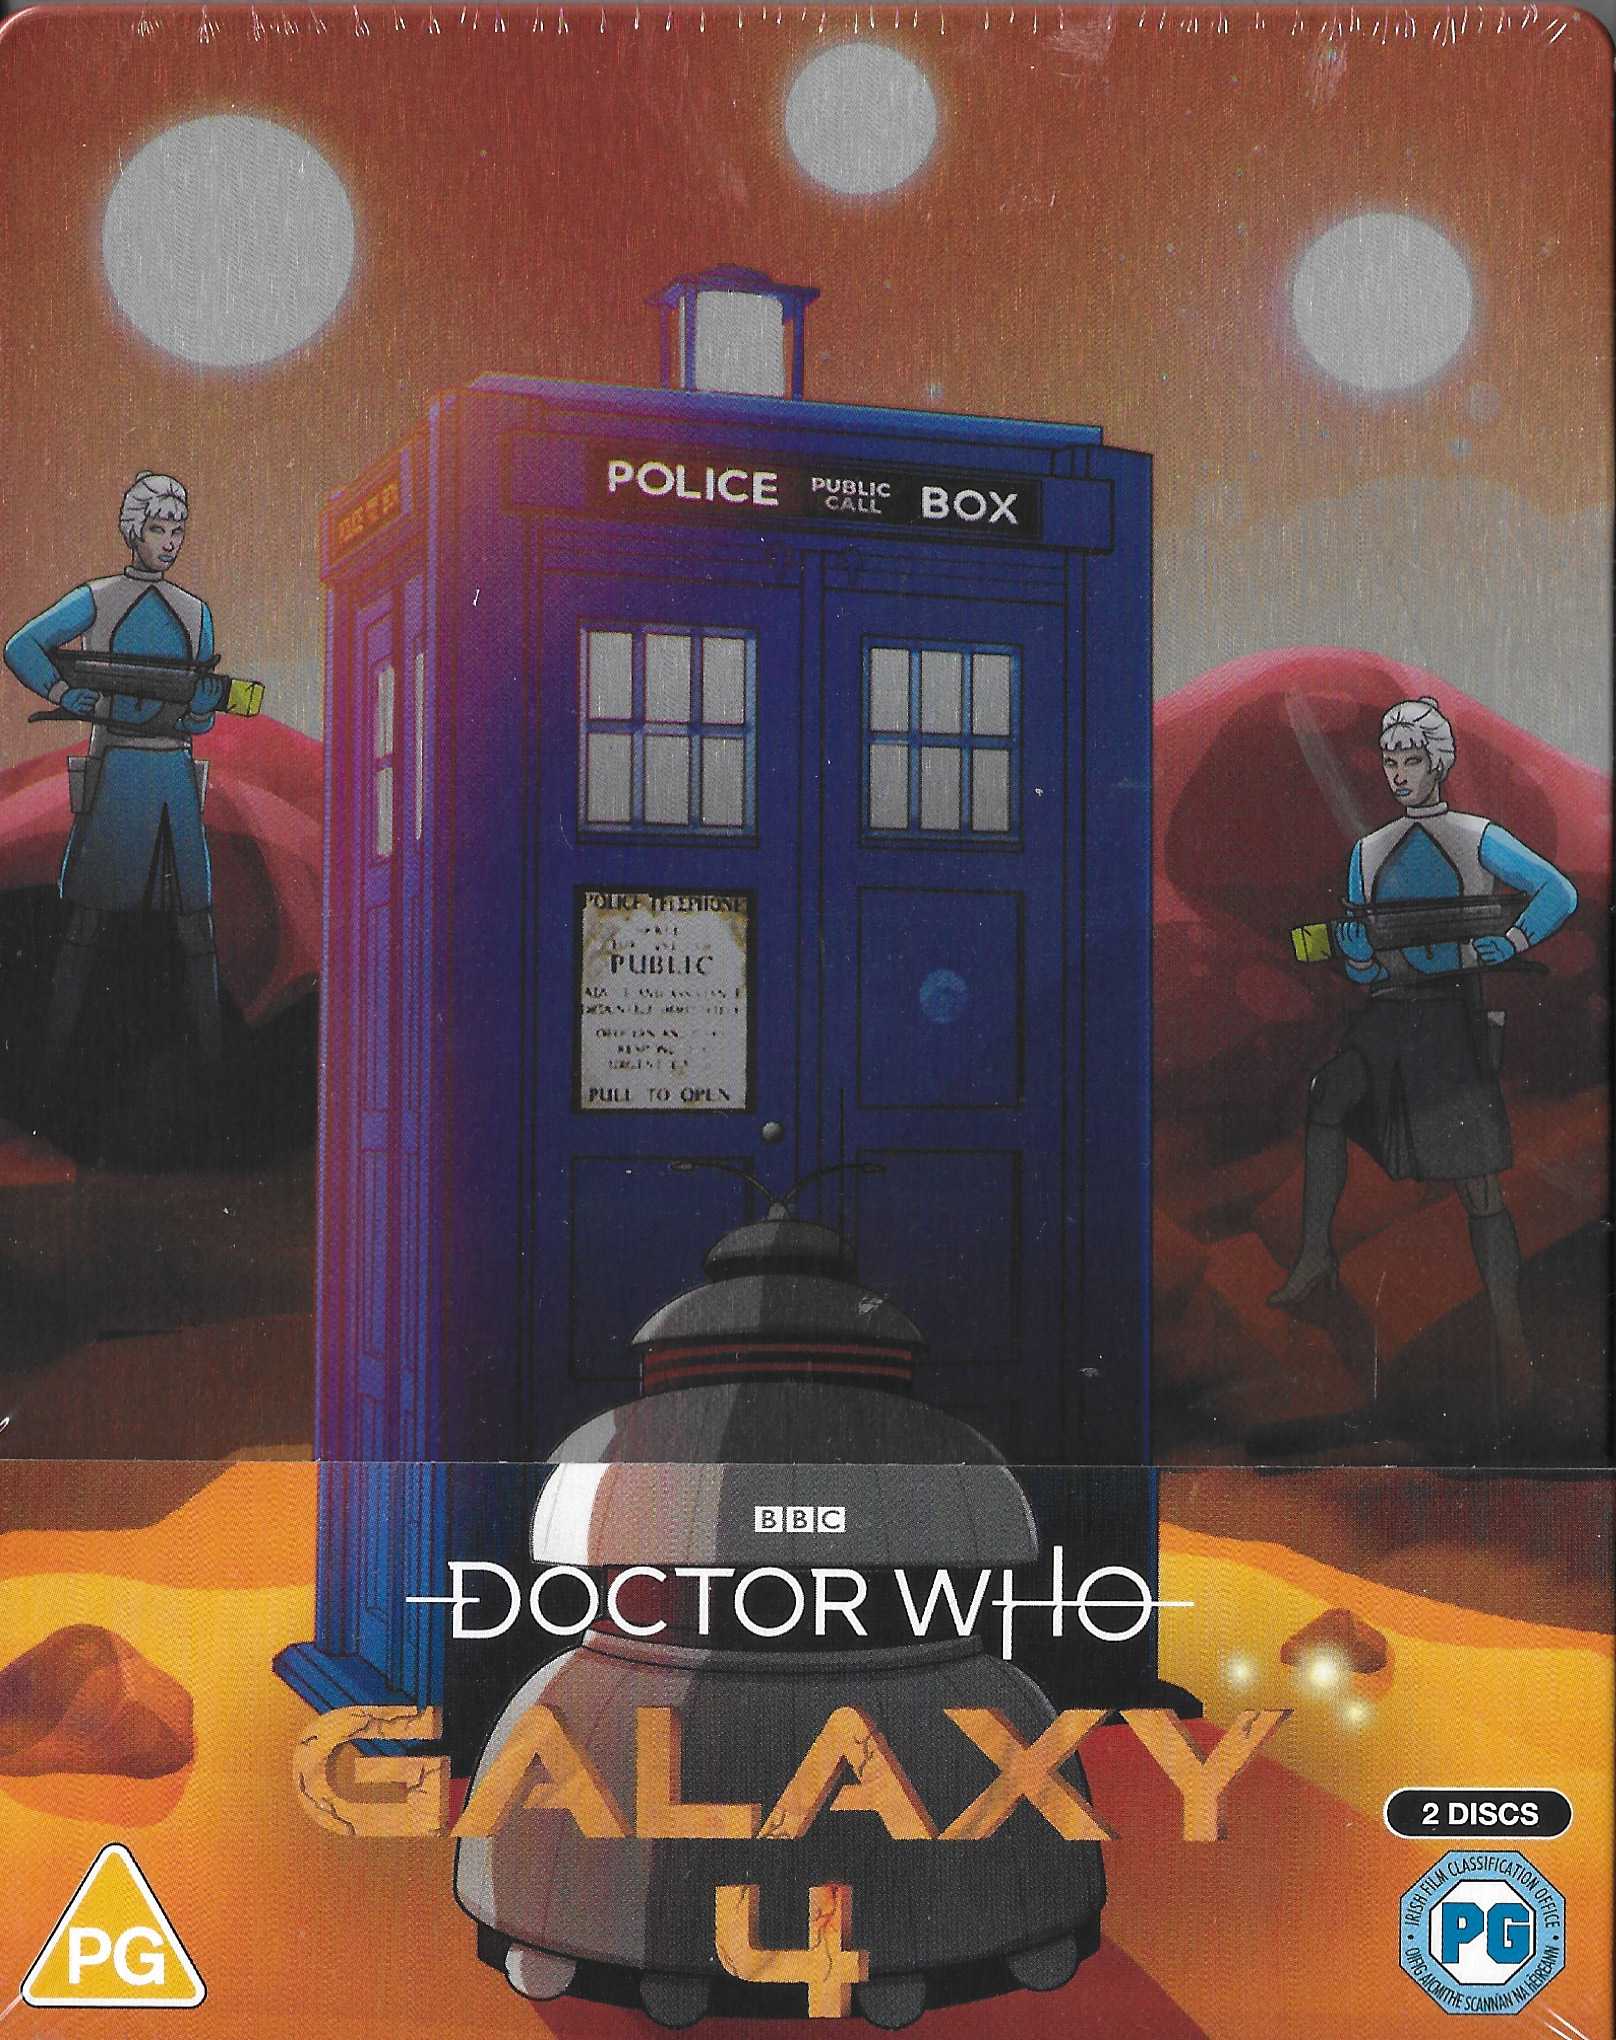 Picture of BBCBD 0524 Doctor Who - Galaxy 4 by artist William Emms from the BBC blu-rays - Records and Tapes library